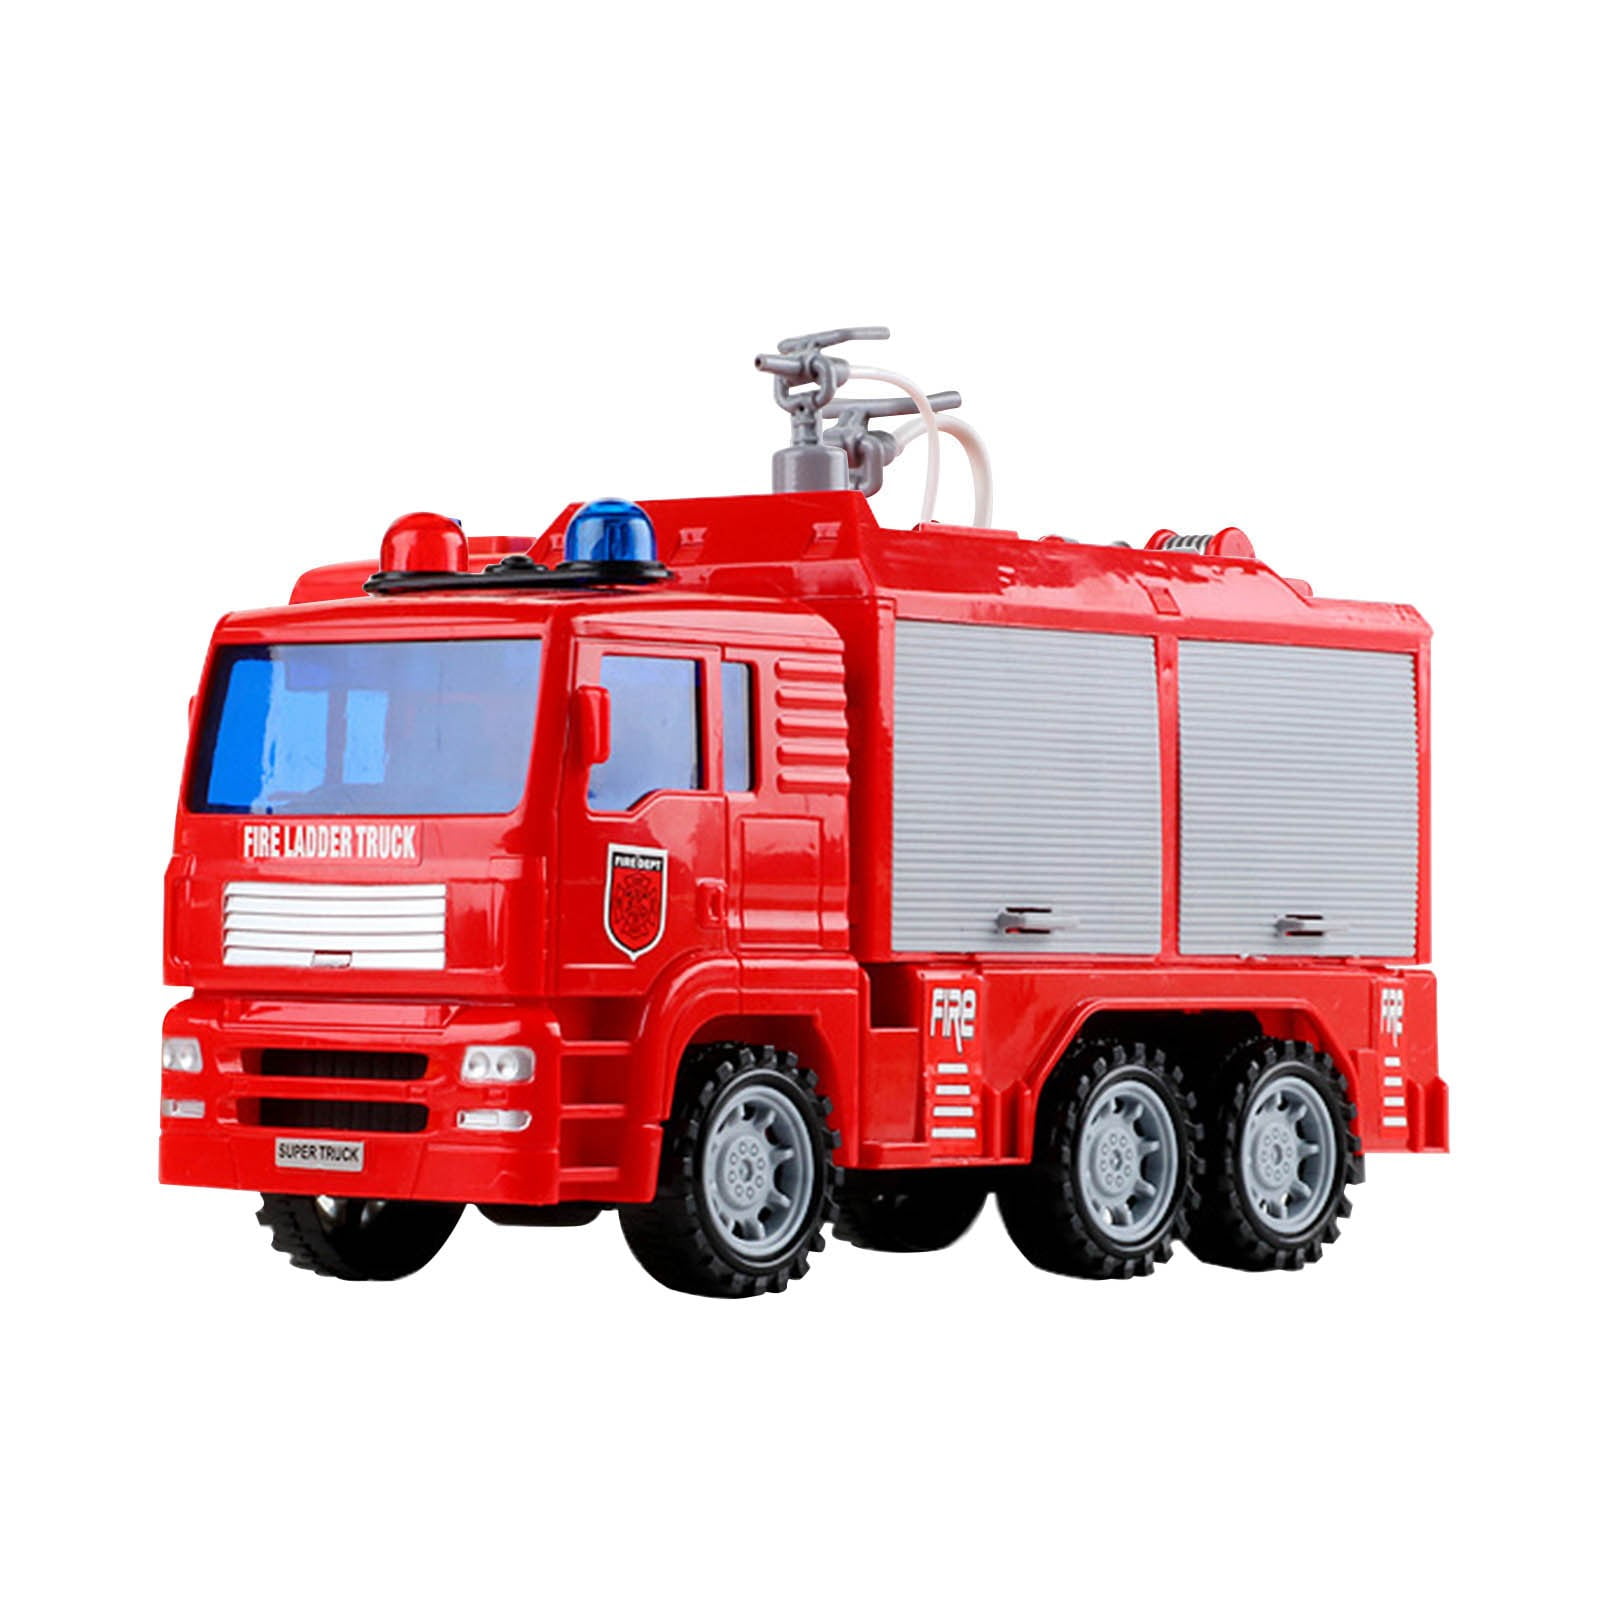 Coolle- Kids Big Fire Truck Toy Fire Trucks for Boys Kids Children 2+ Years Old Made of Quality Material Cars Red Fire Truck Firetruck Big Wheel 